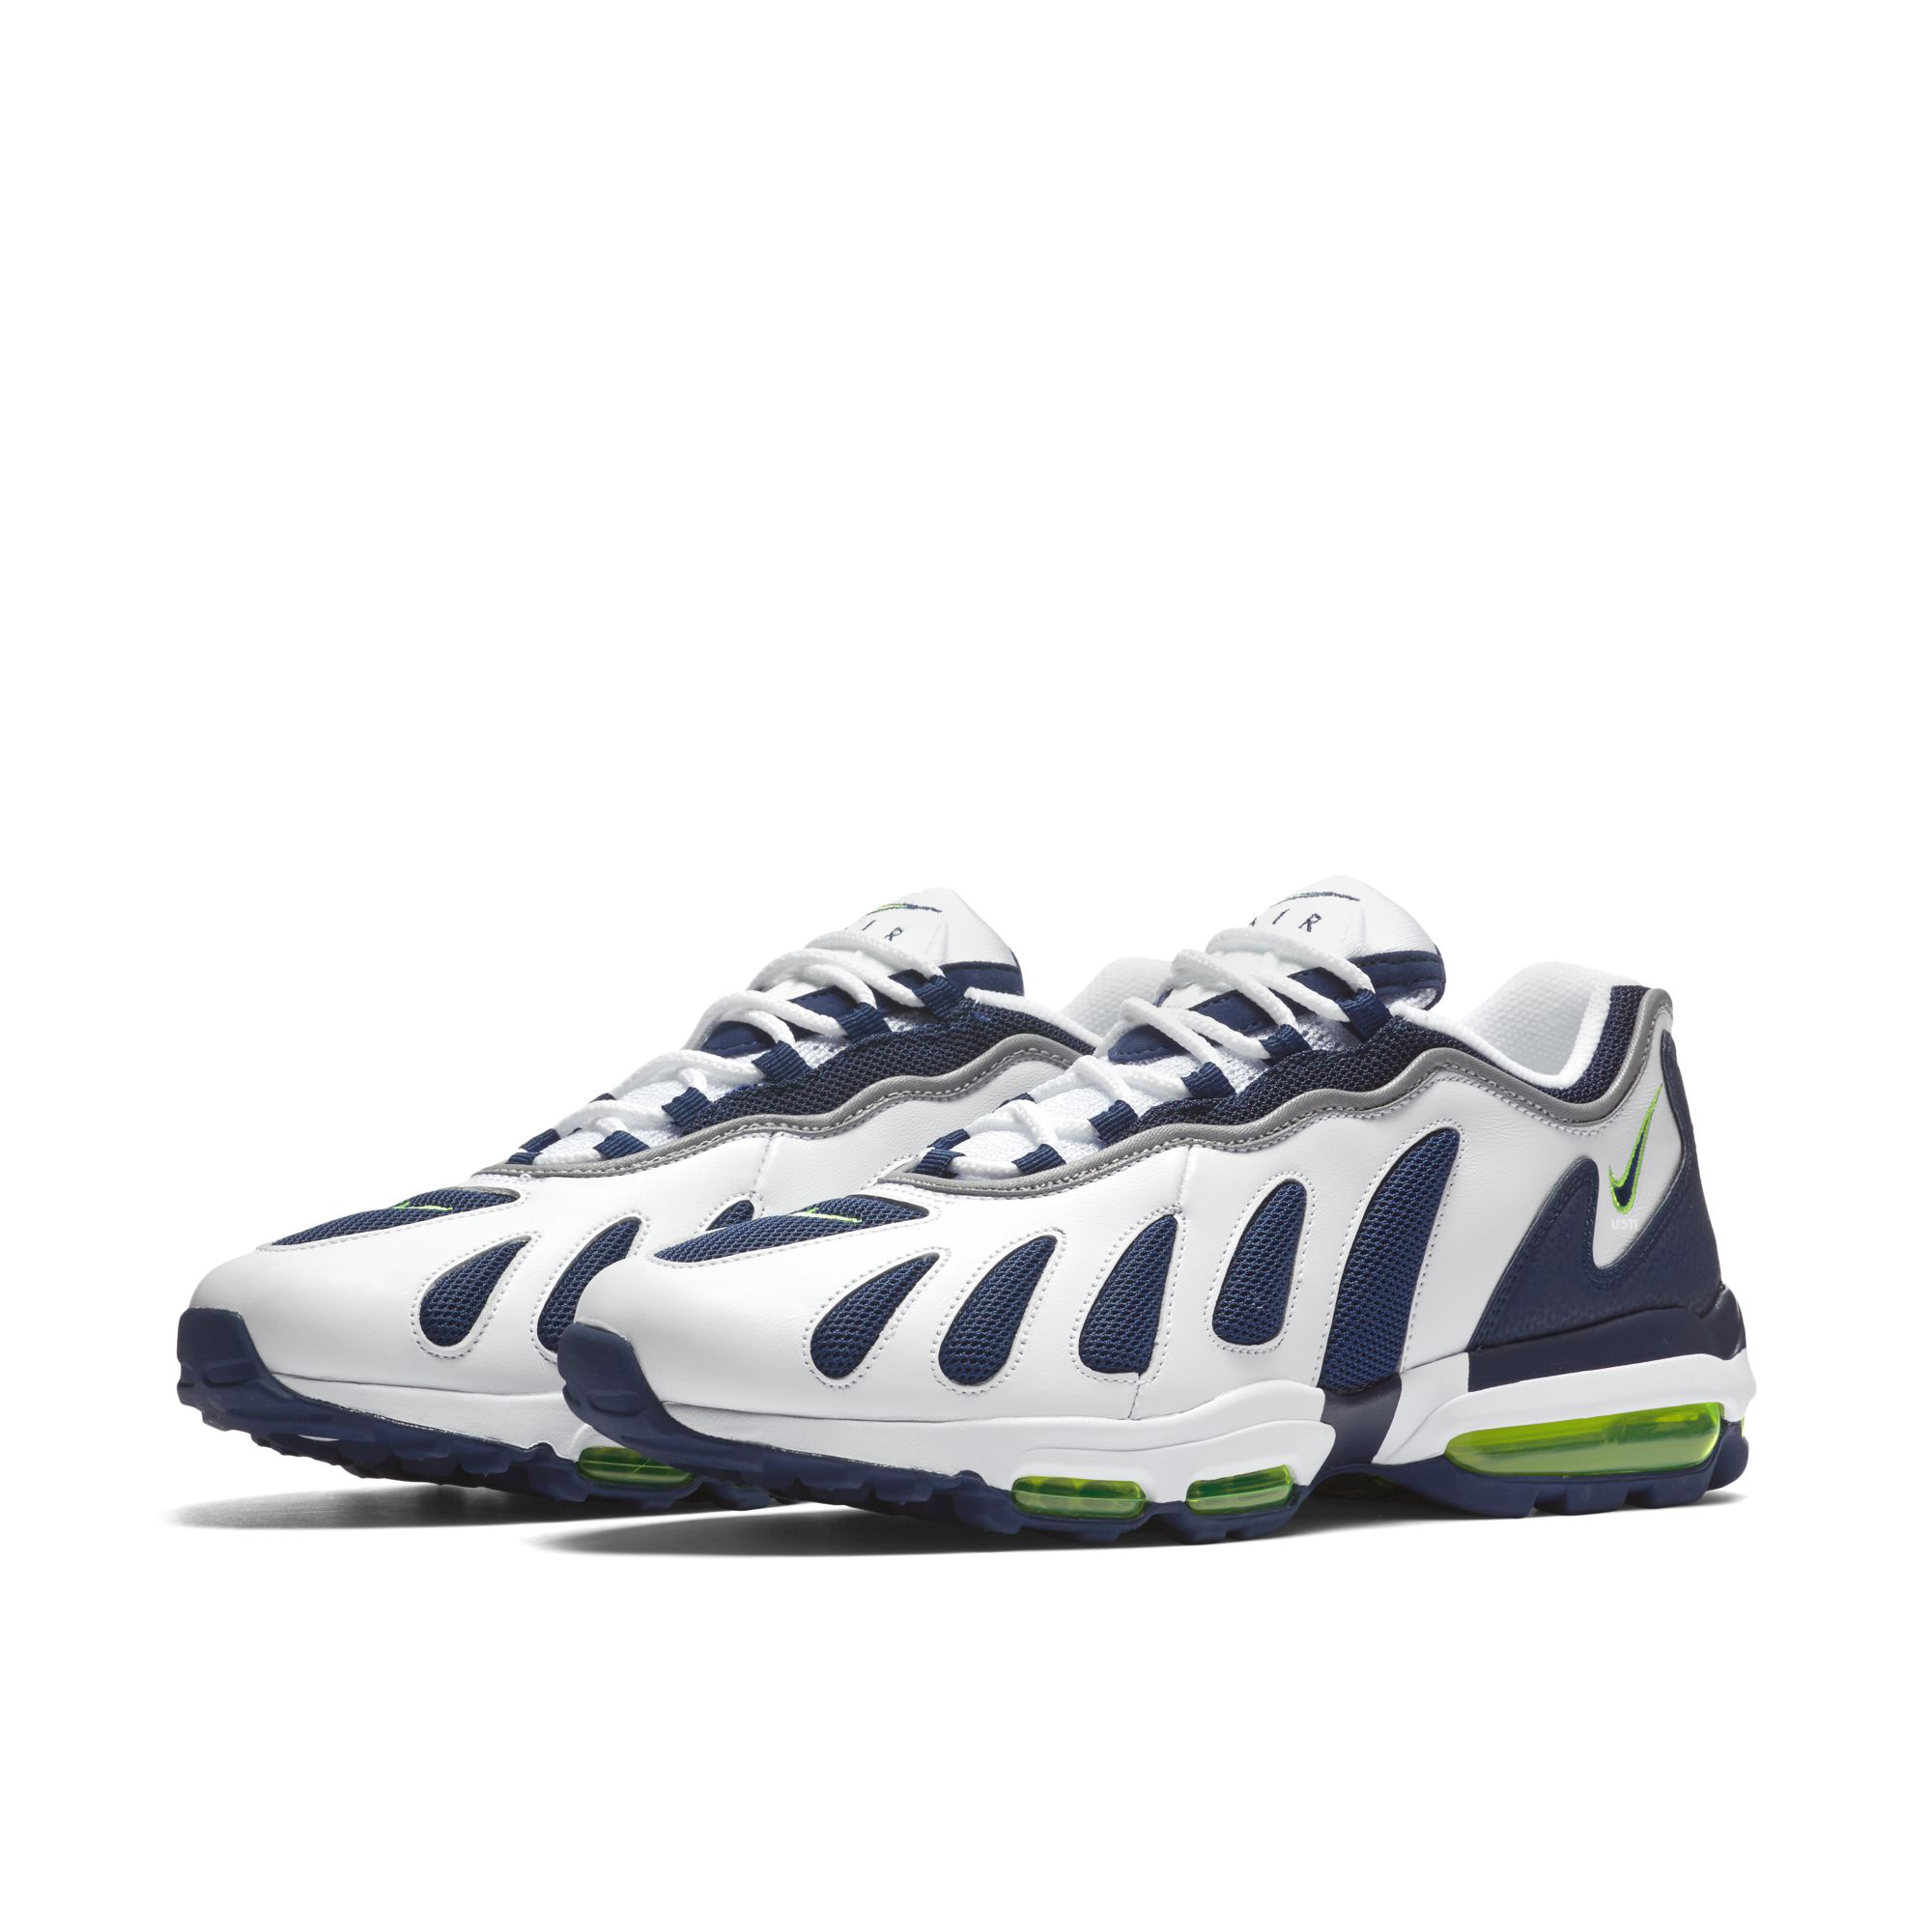 Updated Nike Air Max 96 Retro - WearTesters